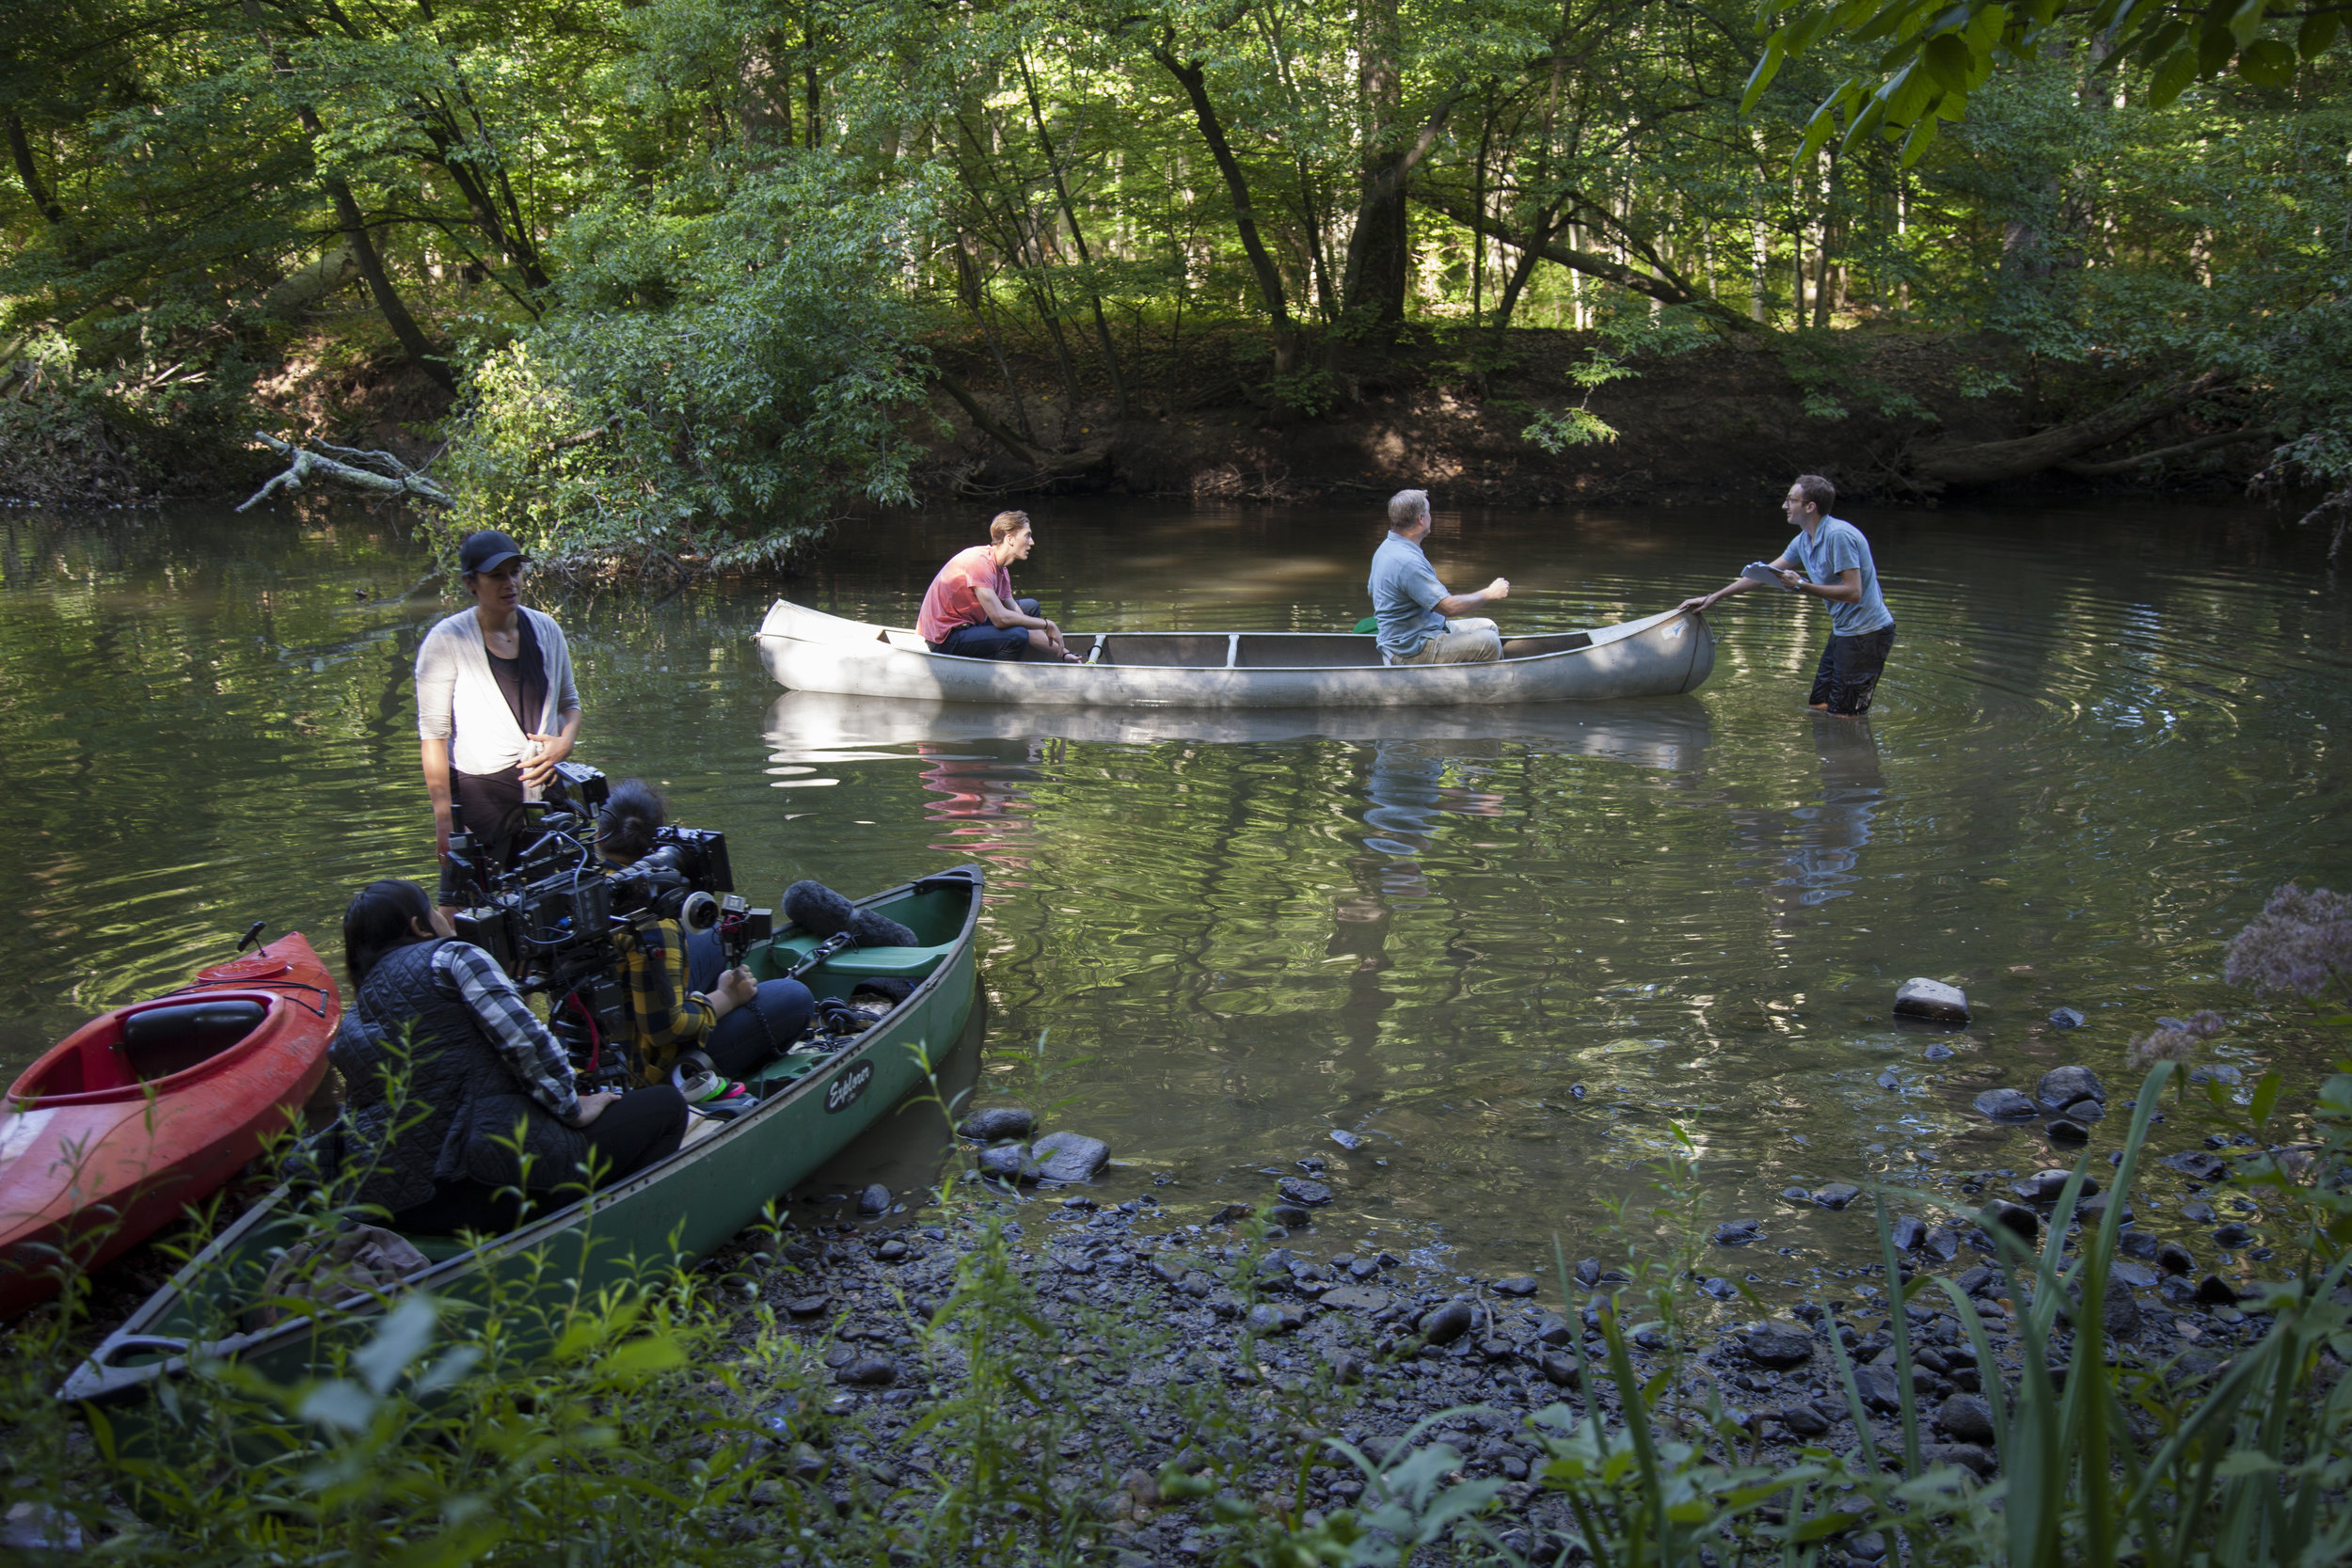  While the camera crew loads into their canoe, Jeff Ryan and Brian Haley rehearse in the water with director Tim Young. 